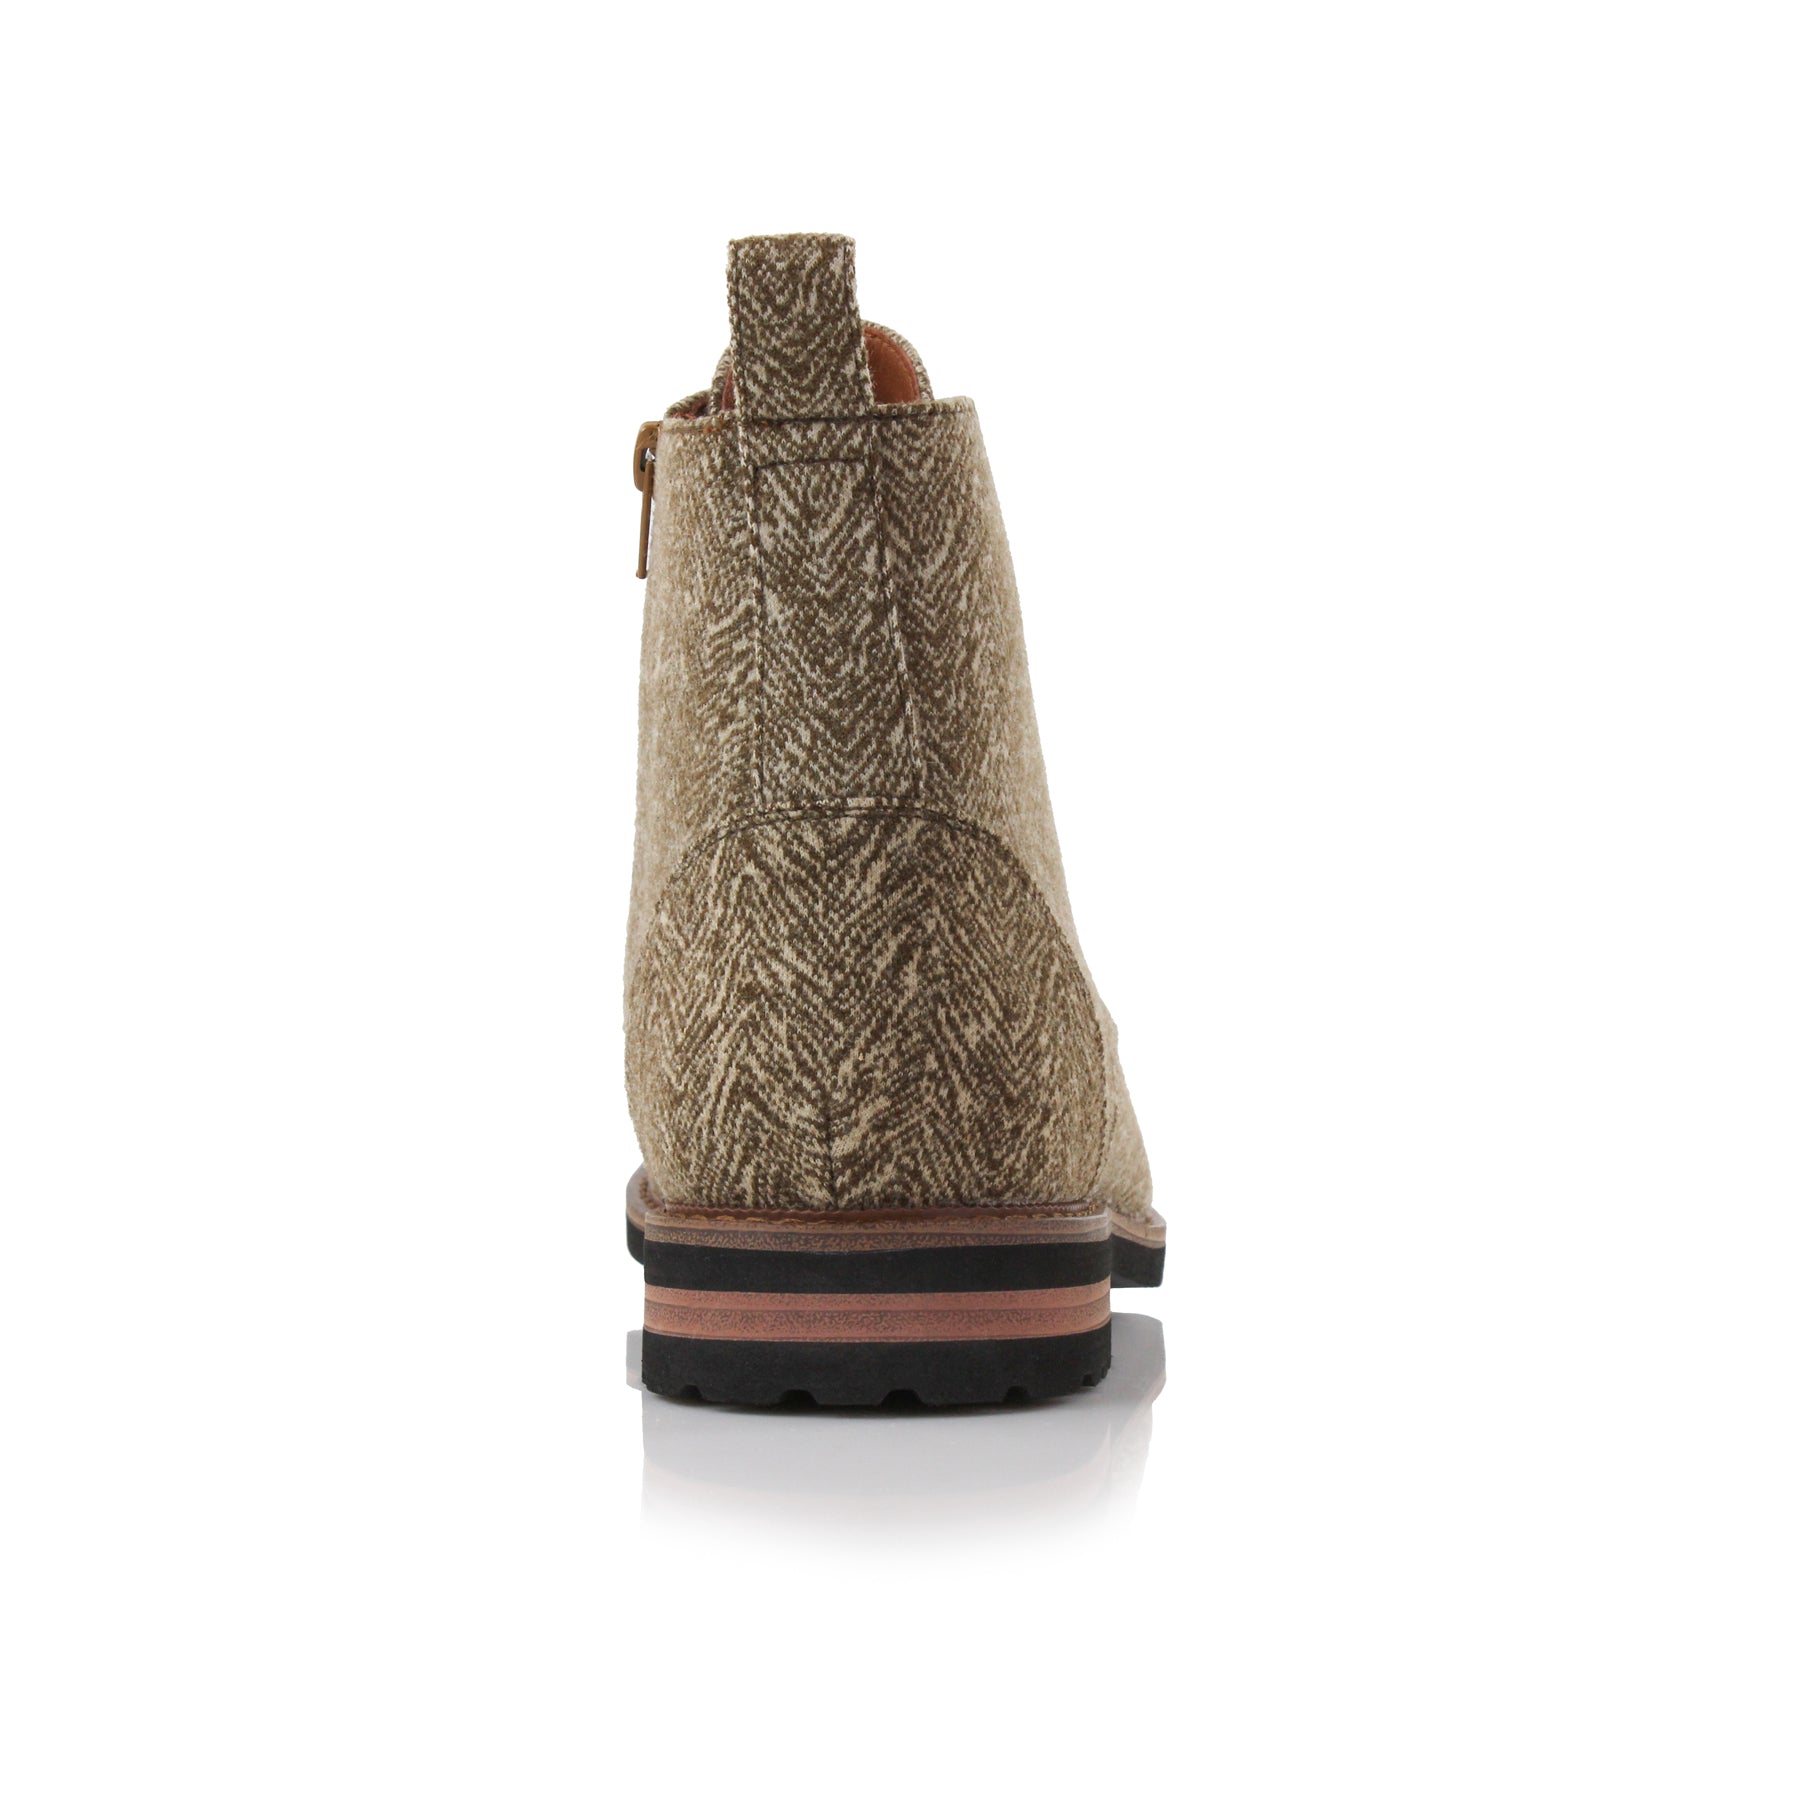 Woolen Ankle Boots | Duke by Polar Fox | Conal Footwear | Back Angle View